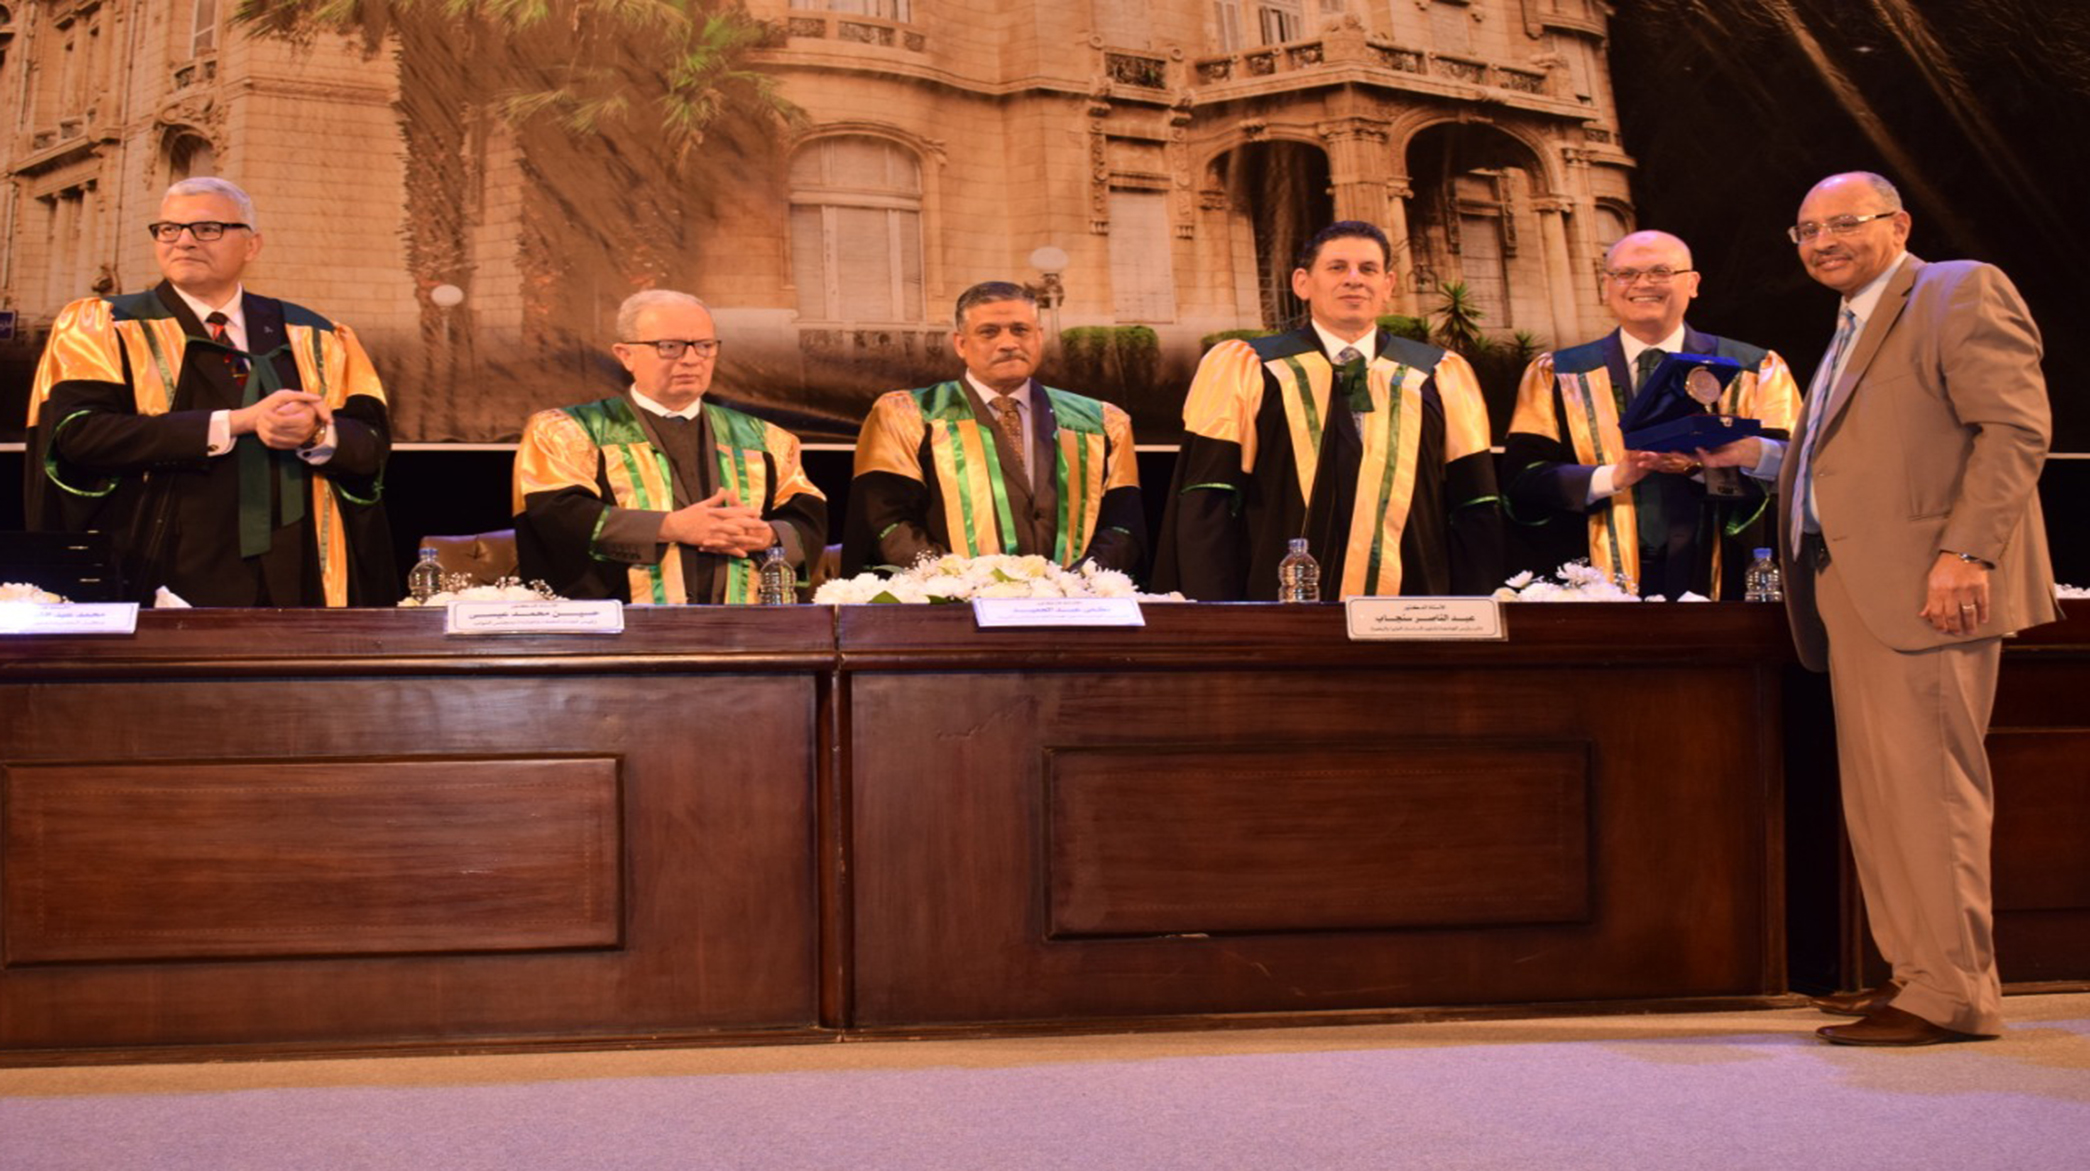 Graduation Ceremony of 2018/2017 batch at the Faculty of Commerce